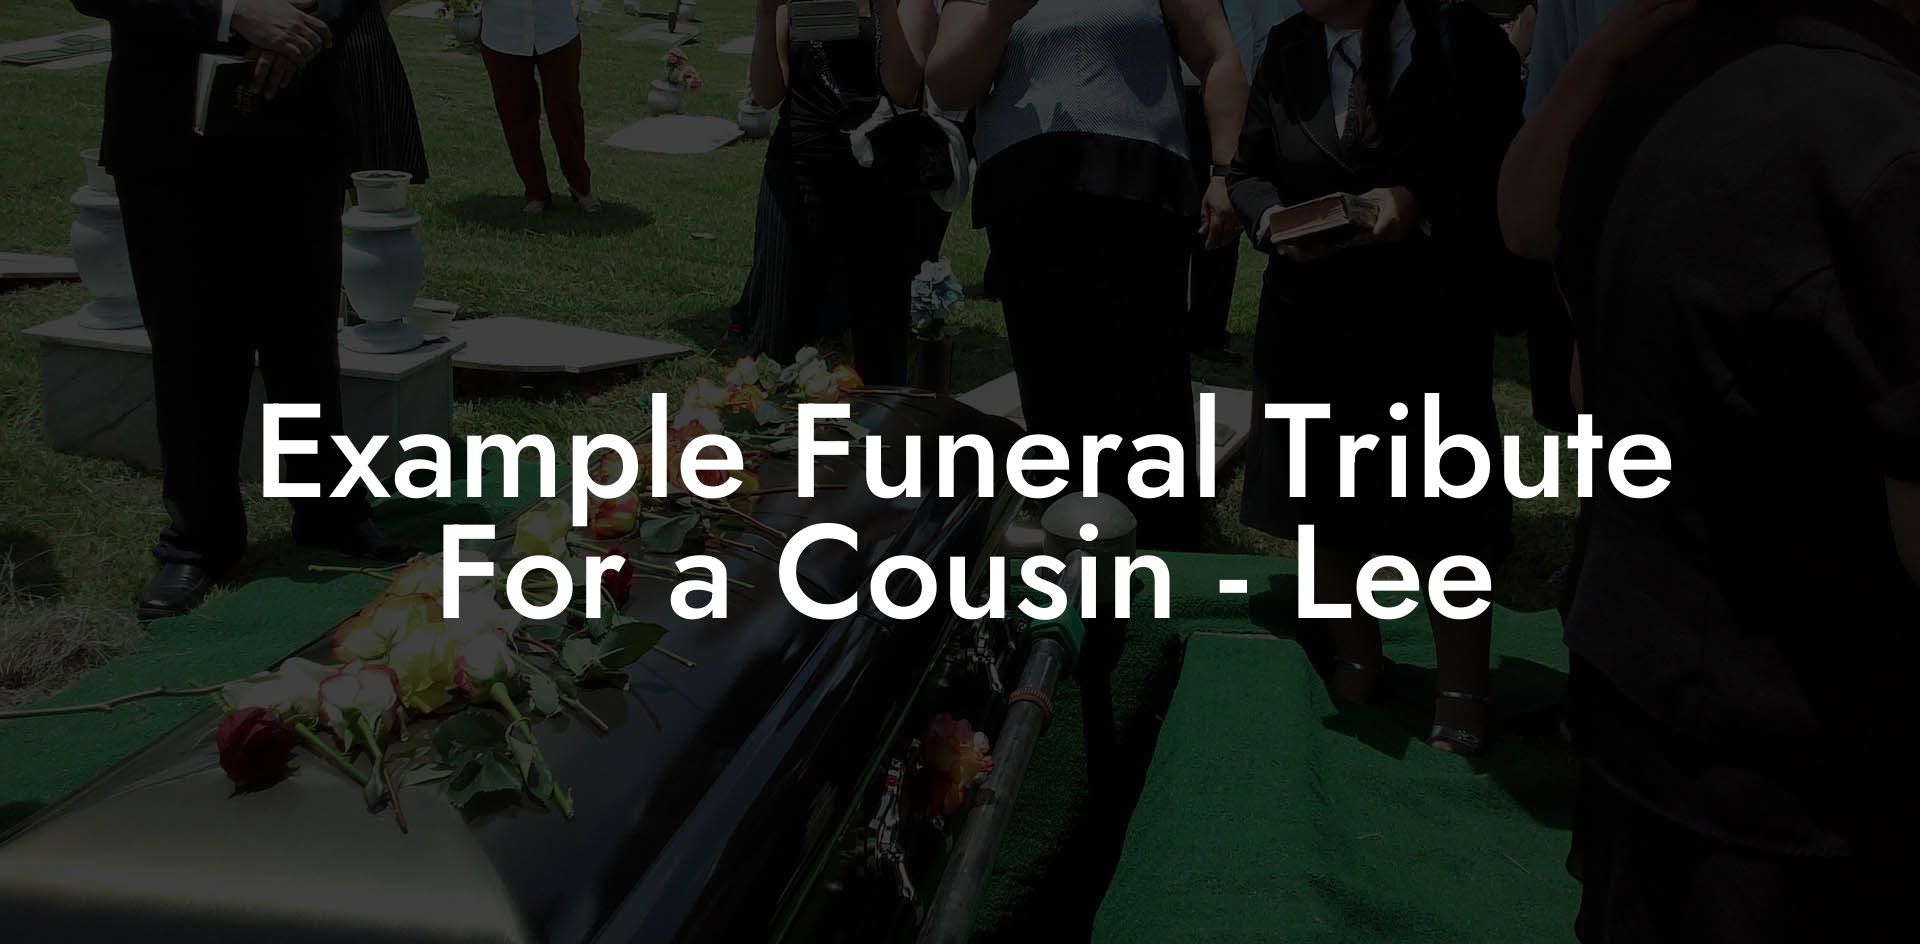 Example Funeral Tribute For a Cousin - Lee